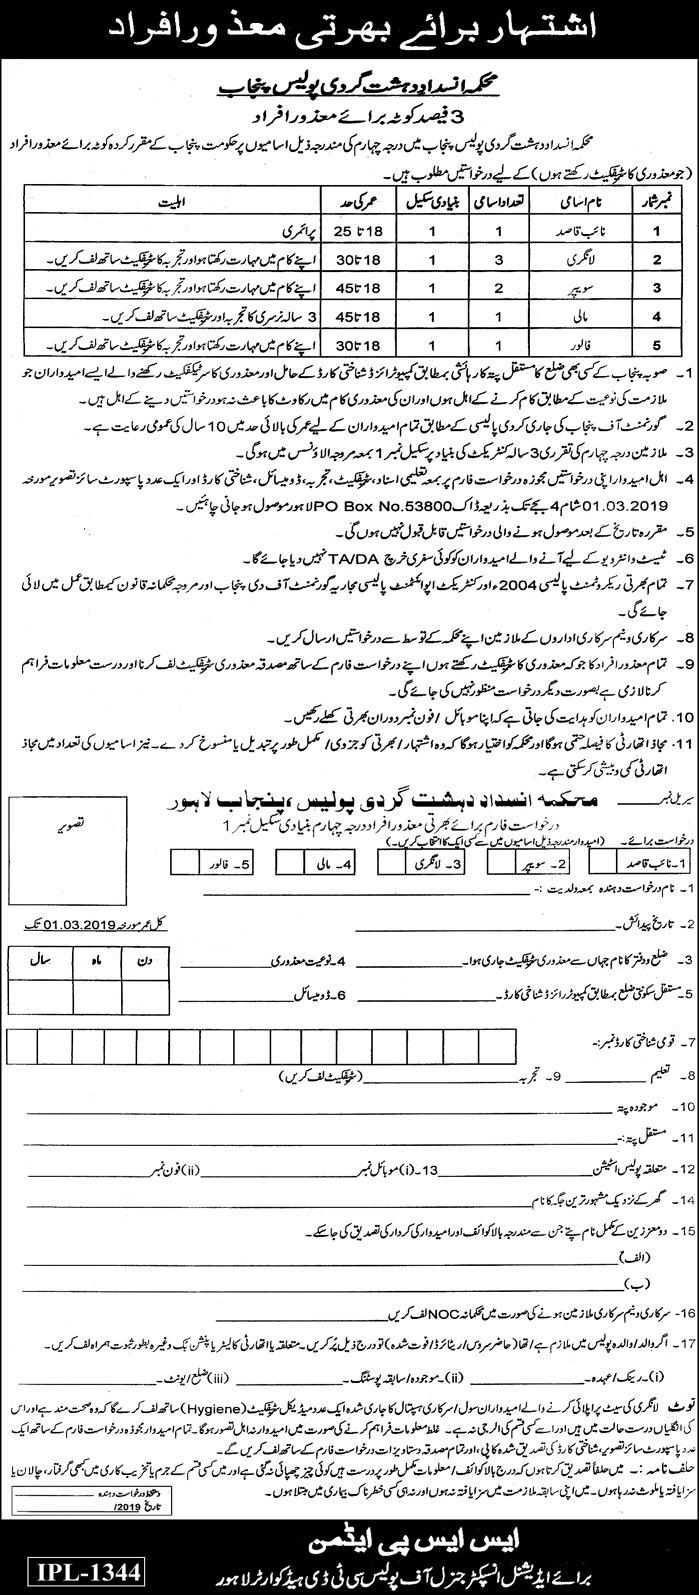 Punjab Police Jobs 2019 for 8+ Naib Qasid & Other Support Staff (Disable Quota)